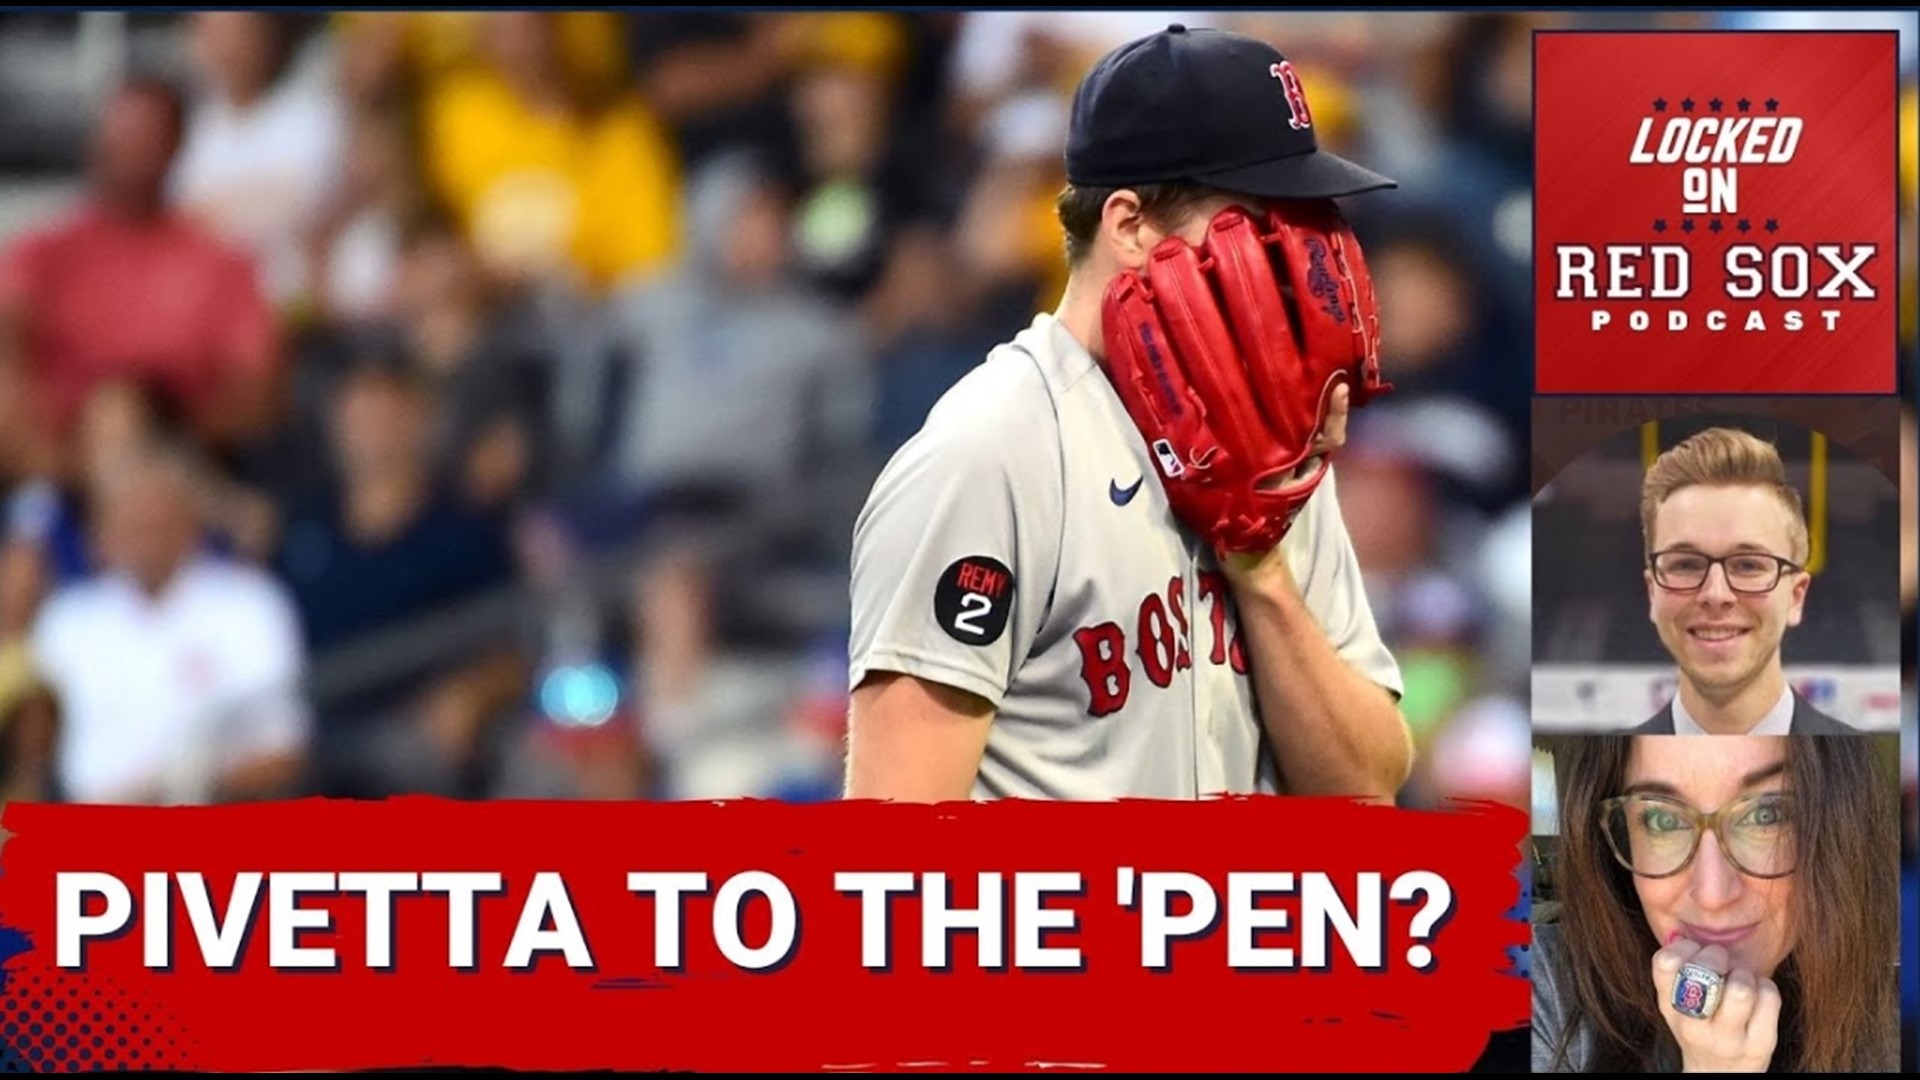 Should the Boston Red Sox move Nick Pivetta to the bullpen? That became a topic of discussion for this episode of Locked On Red Sox.